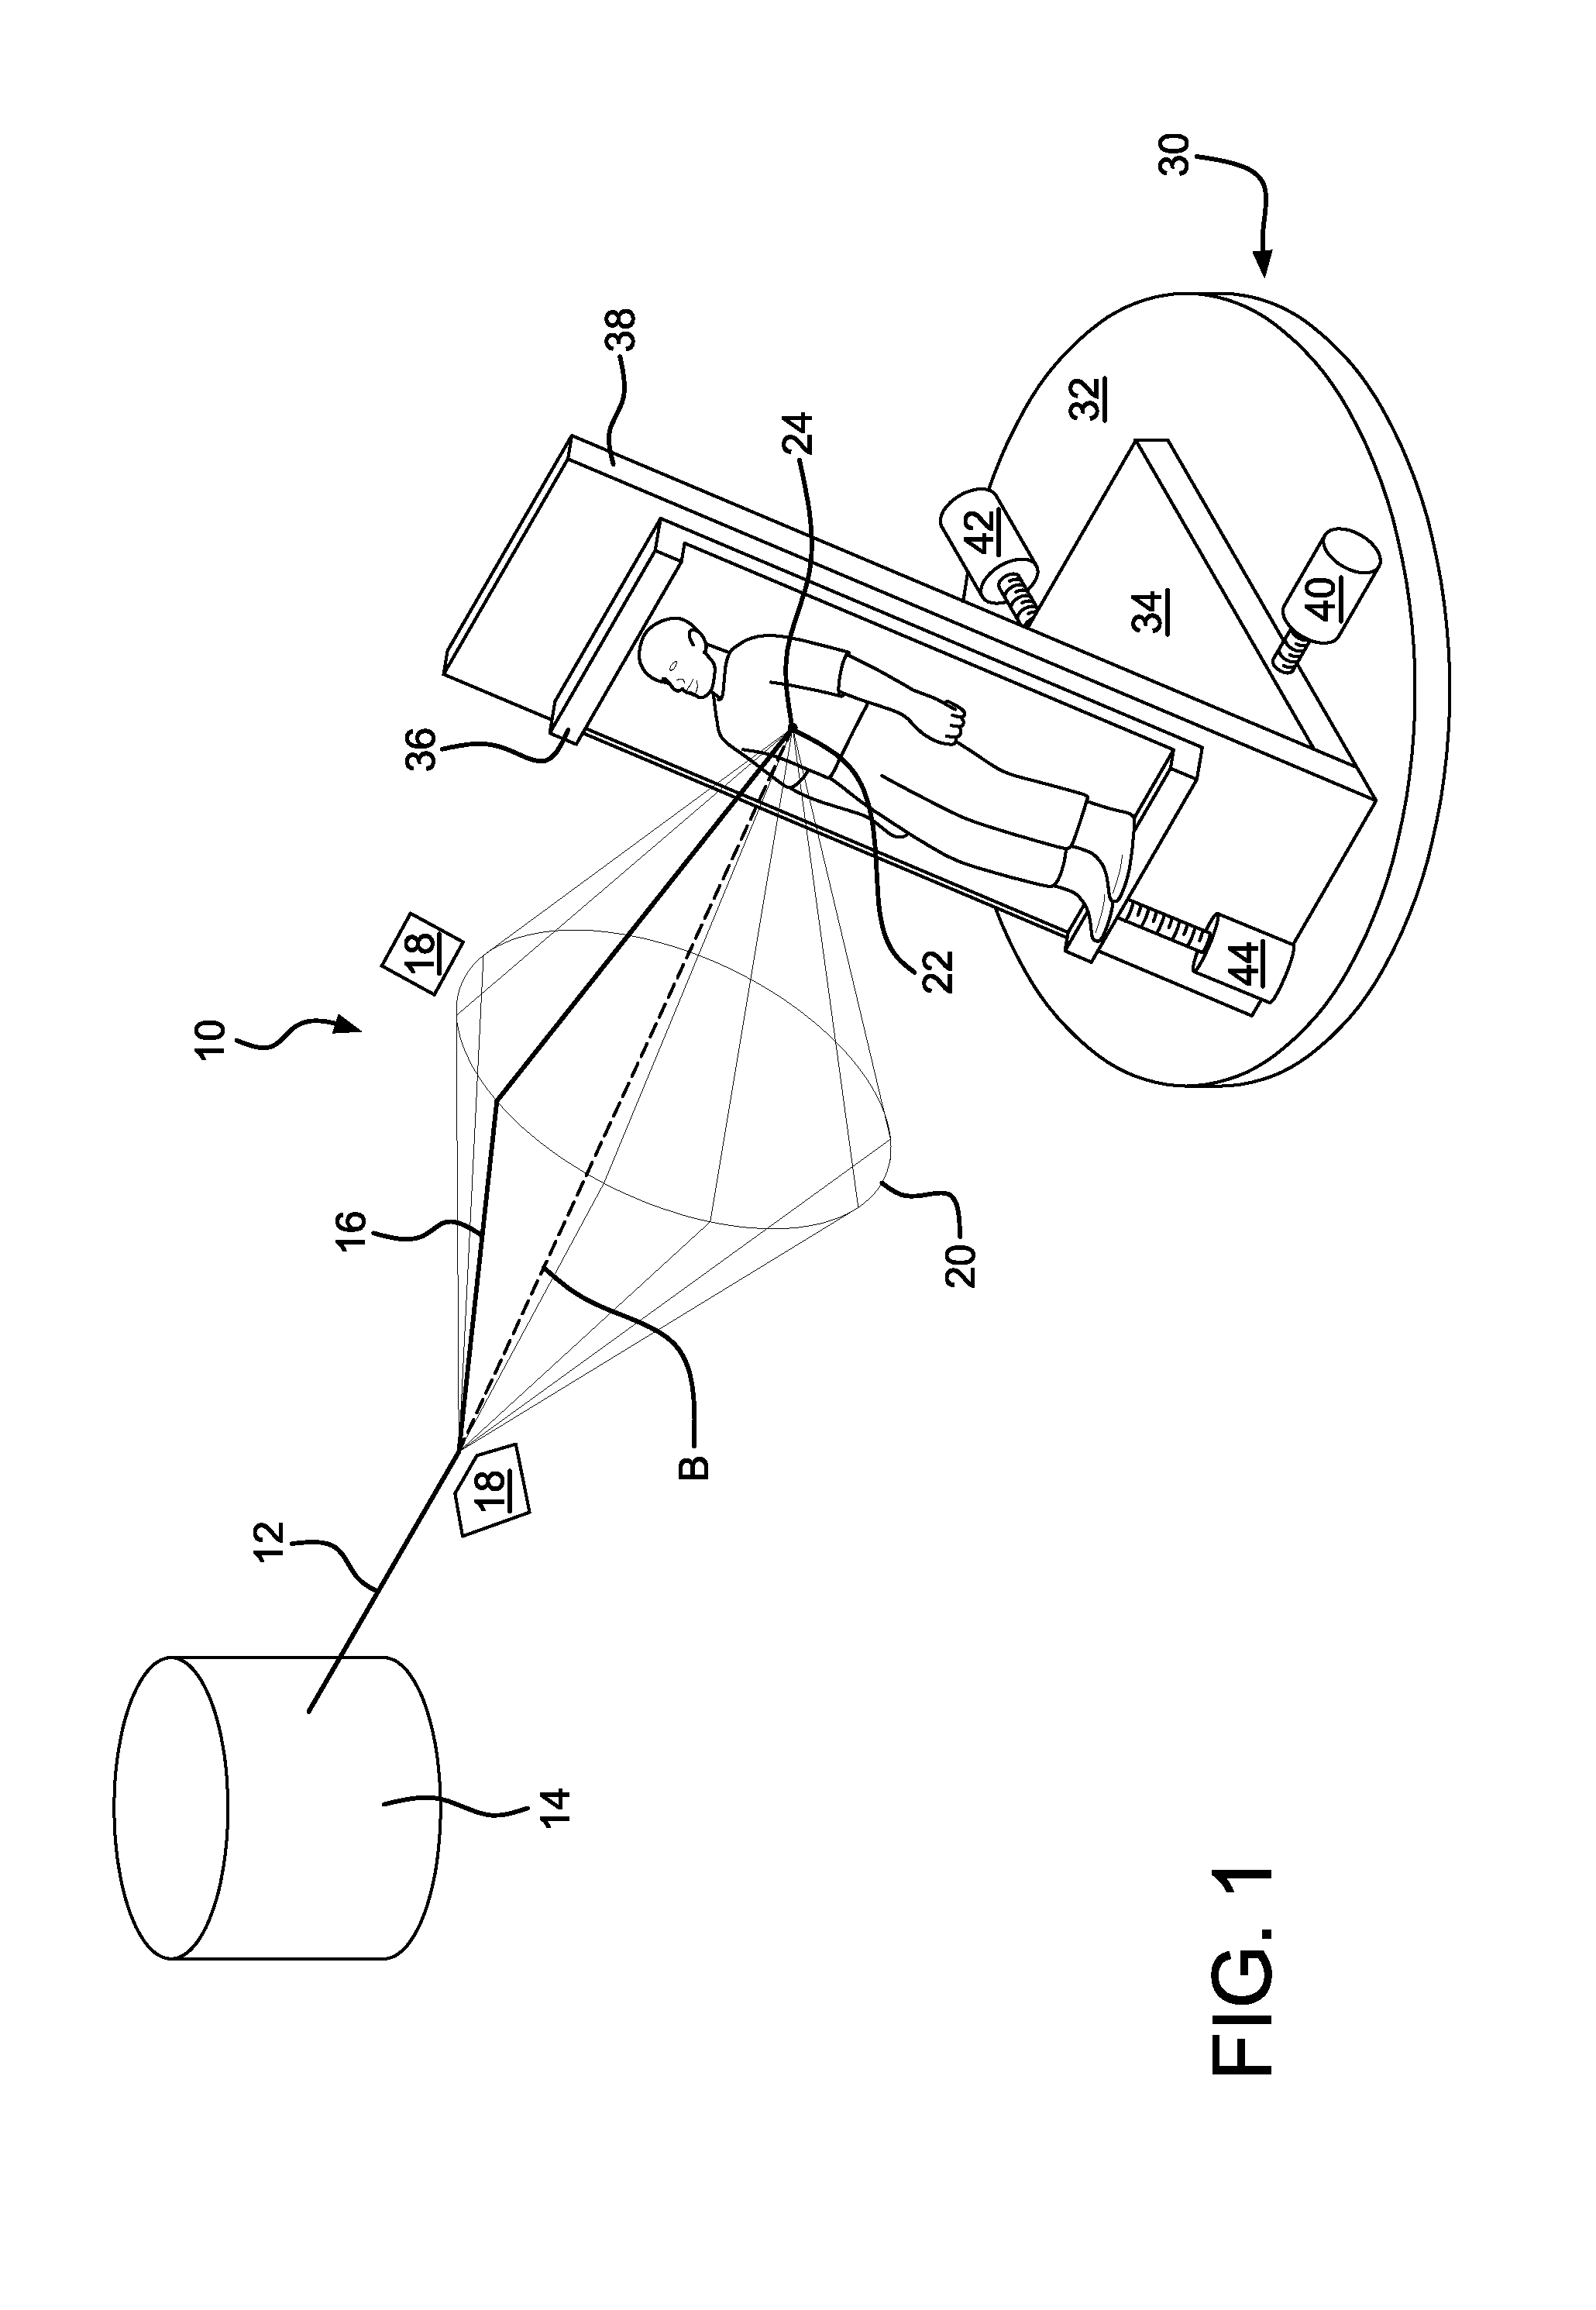 Device and method for administering particle beam therapy